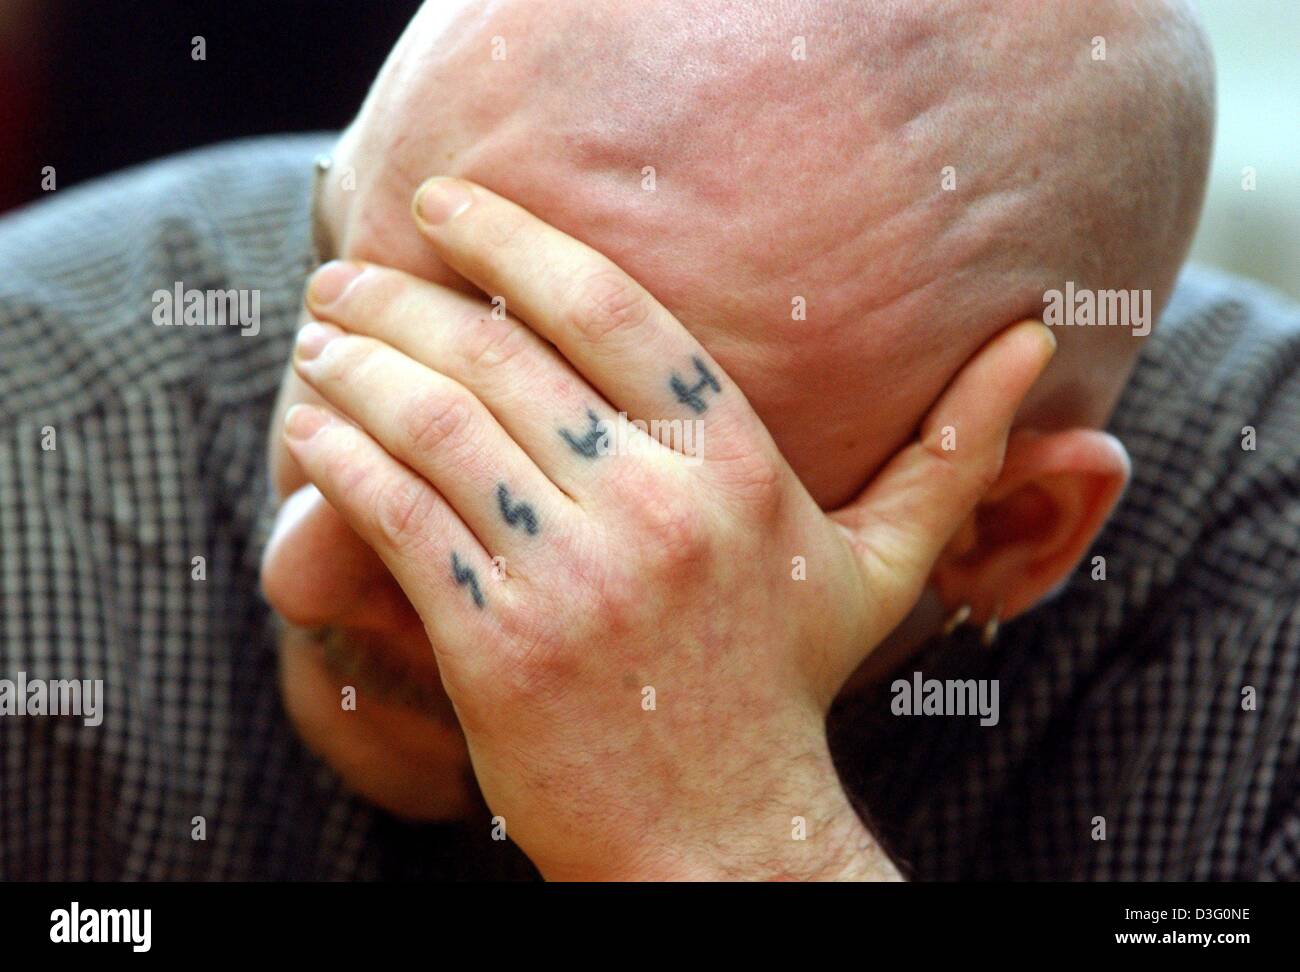 (dpa) - Defendant Matthias R. covers his face with his hand, which bears the tattoo 'Hass' ('hate') on four of his fingers, during his trial for the suspected murder of a 29-year-old at the District Court in Frankfurt Oder, eastern Germany, 11 February 2003.  The tattoo is commonly found among those involved in the Neo-Nazi scene.  The 23-year-old murder suspect is being tried alon Stock Photo